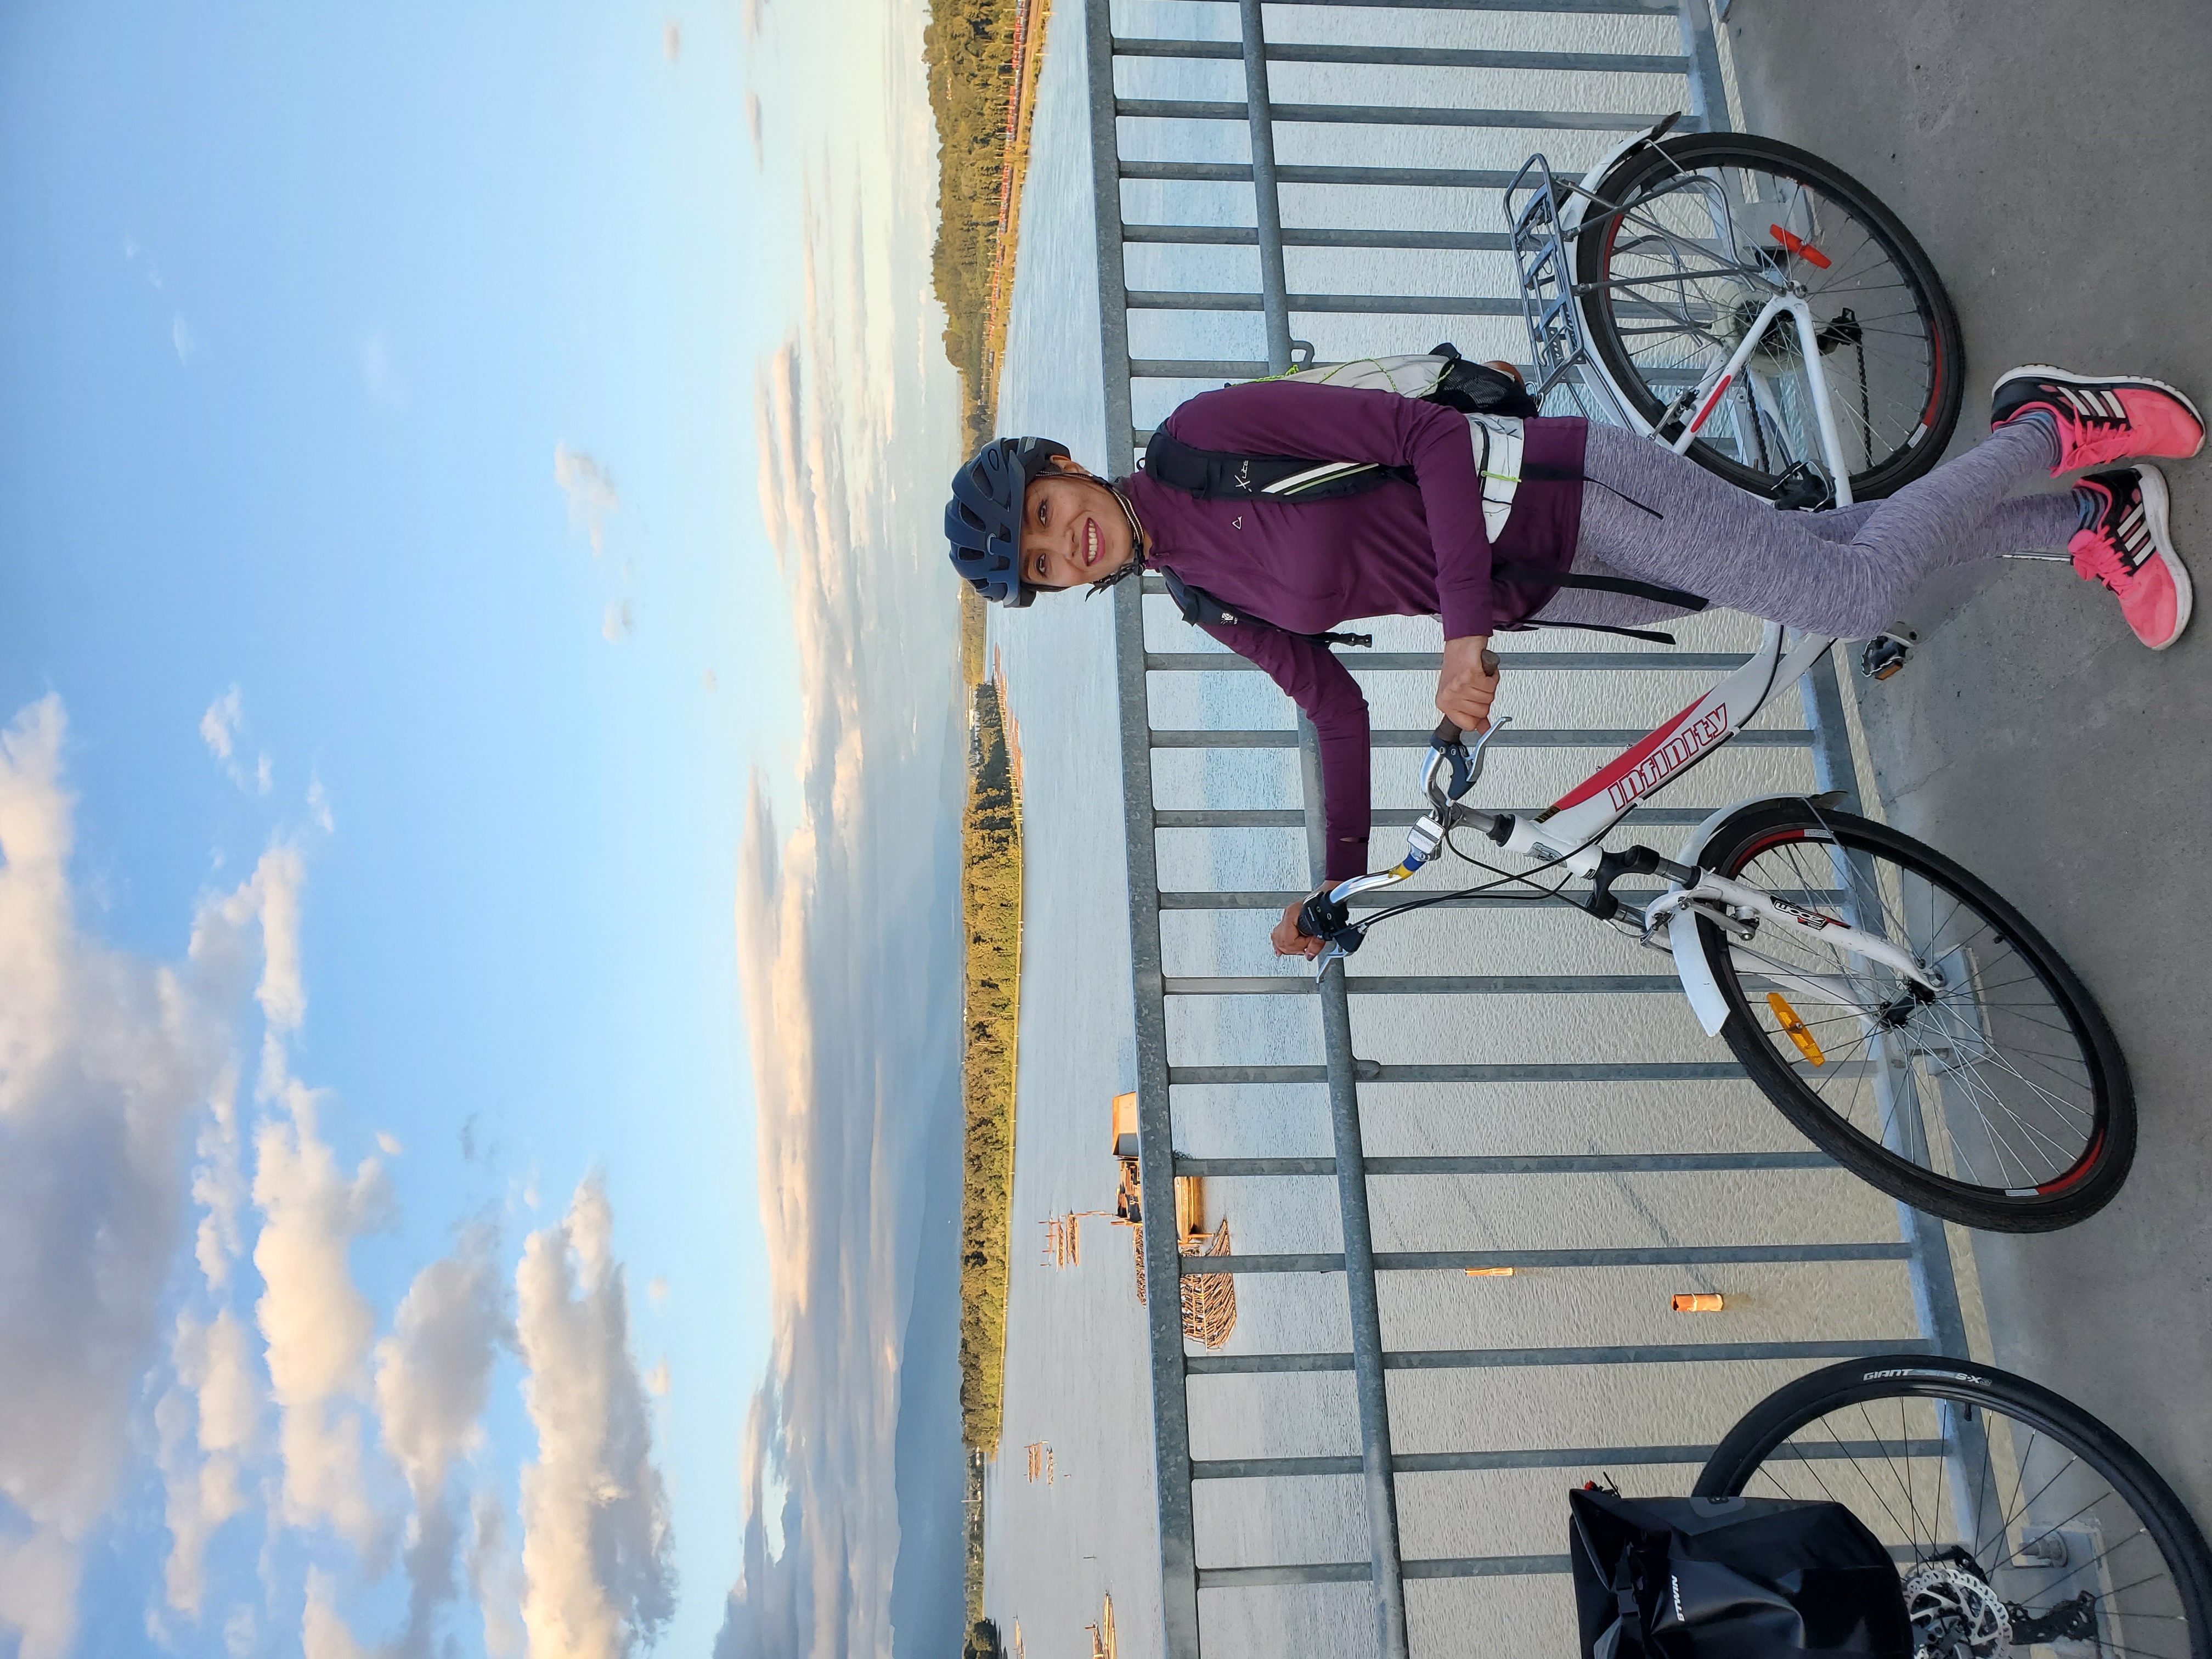 Razieh stands with her bike along the bike path on the Port Mann Bridge. She is wearing gray leggings, running shoes, and a purple long sleeve zip up. We can see the Fraser River below her. The sky is blue with white, fluffy clouds.